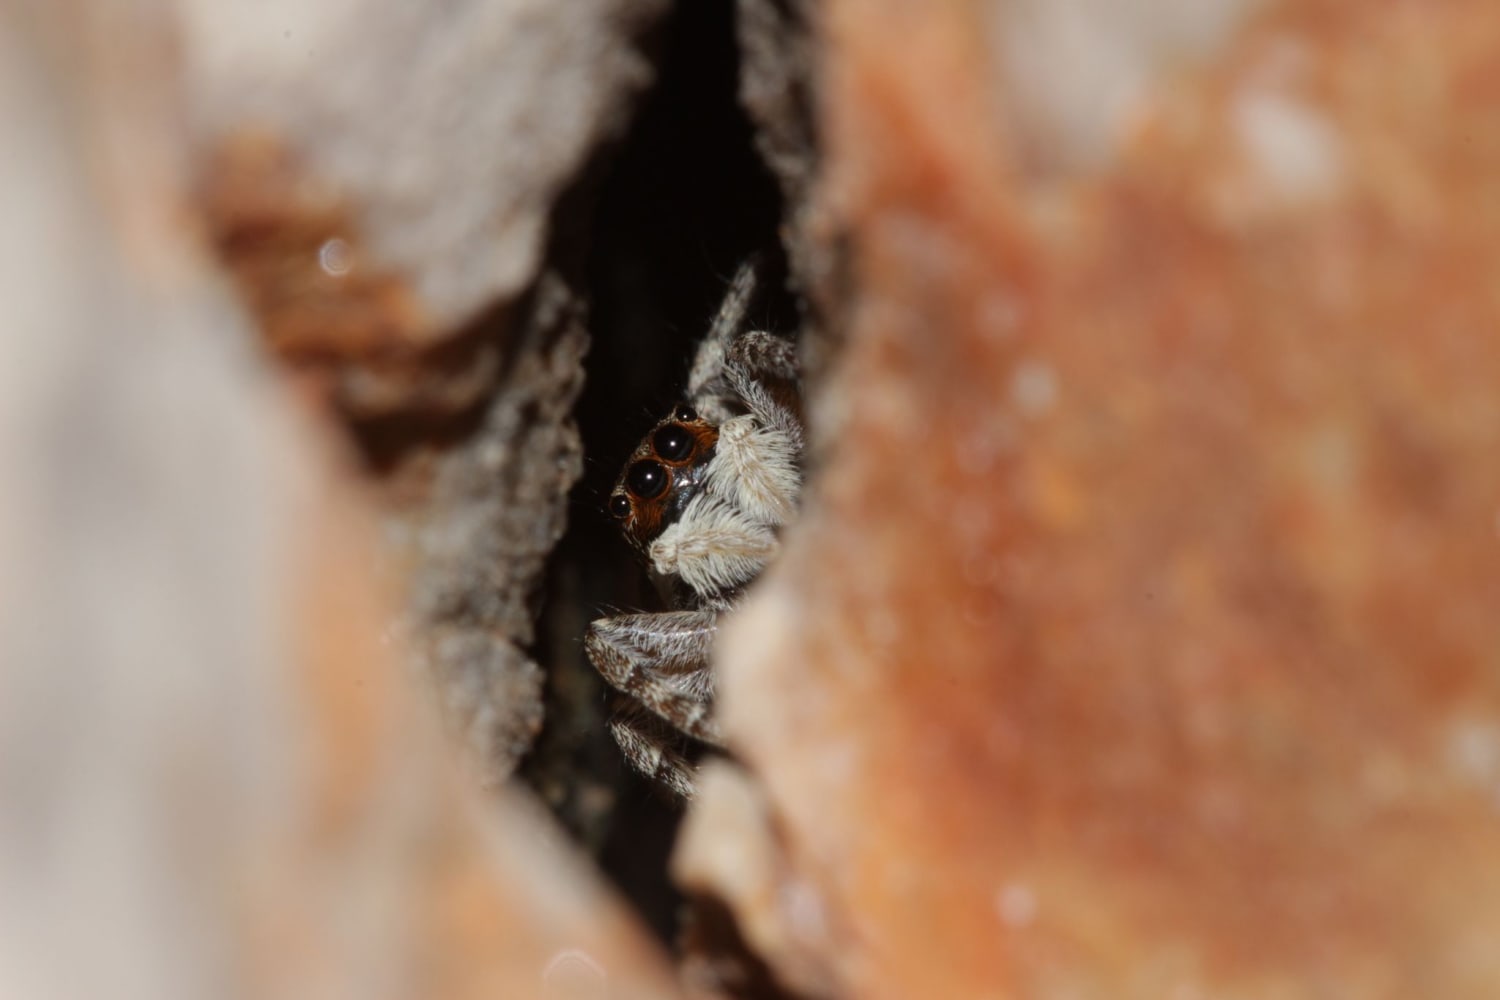 Look! Spiders CAN be cute! 😍 This little guy is a species of jumping spider. Researchers have just found out that they have a cognitive ability only previously known in vertebrates. Full story: https://t.co/CwKTzTqidP 📷: emanuelkern/iNaturalist/CC BY 4.0